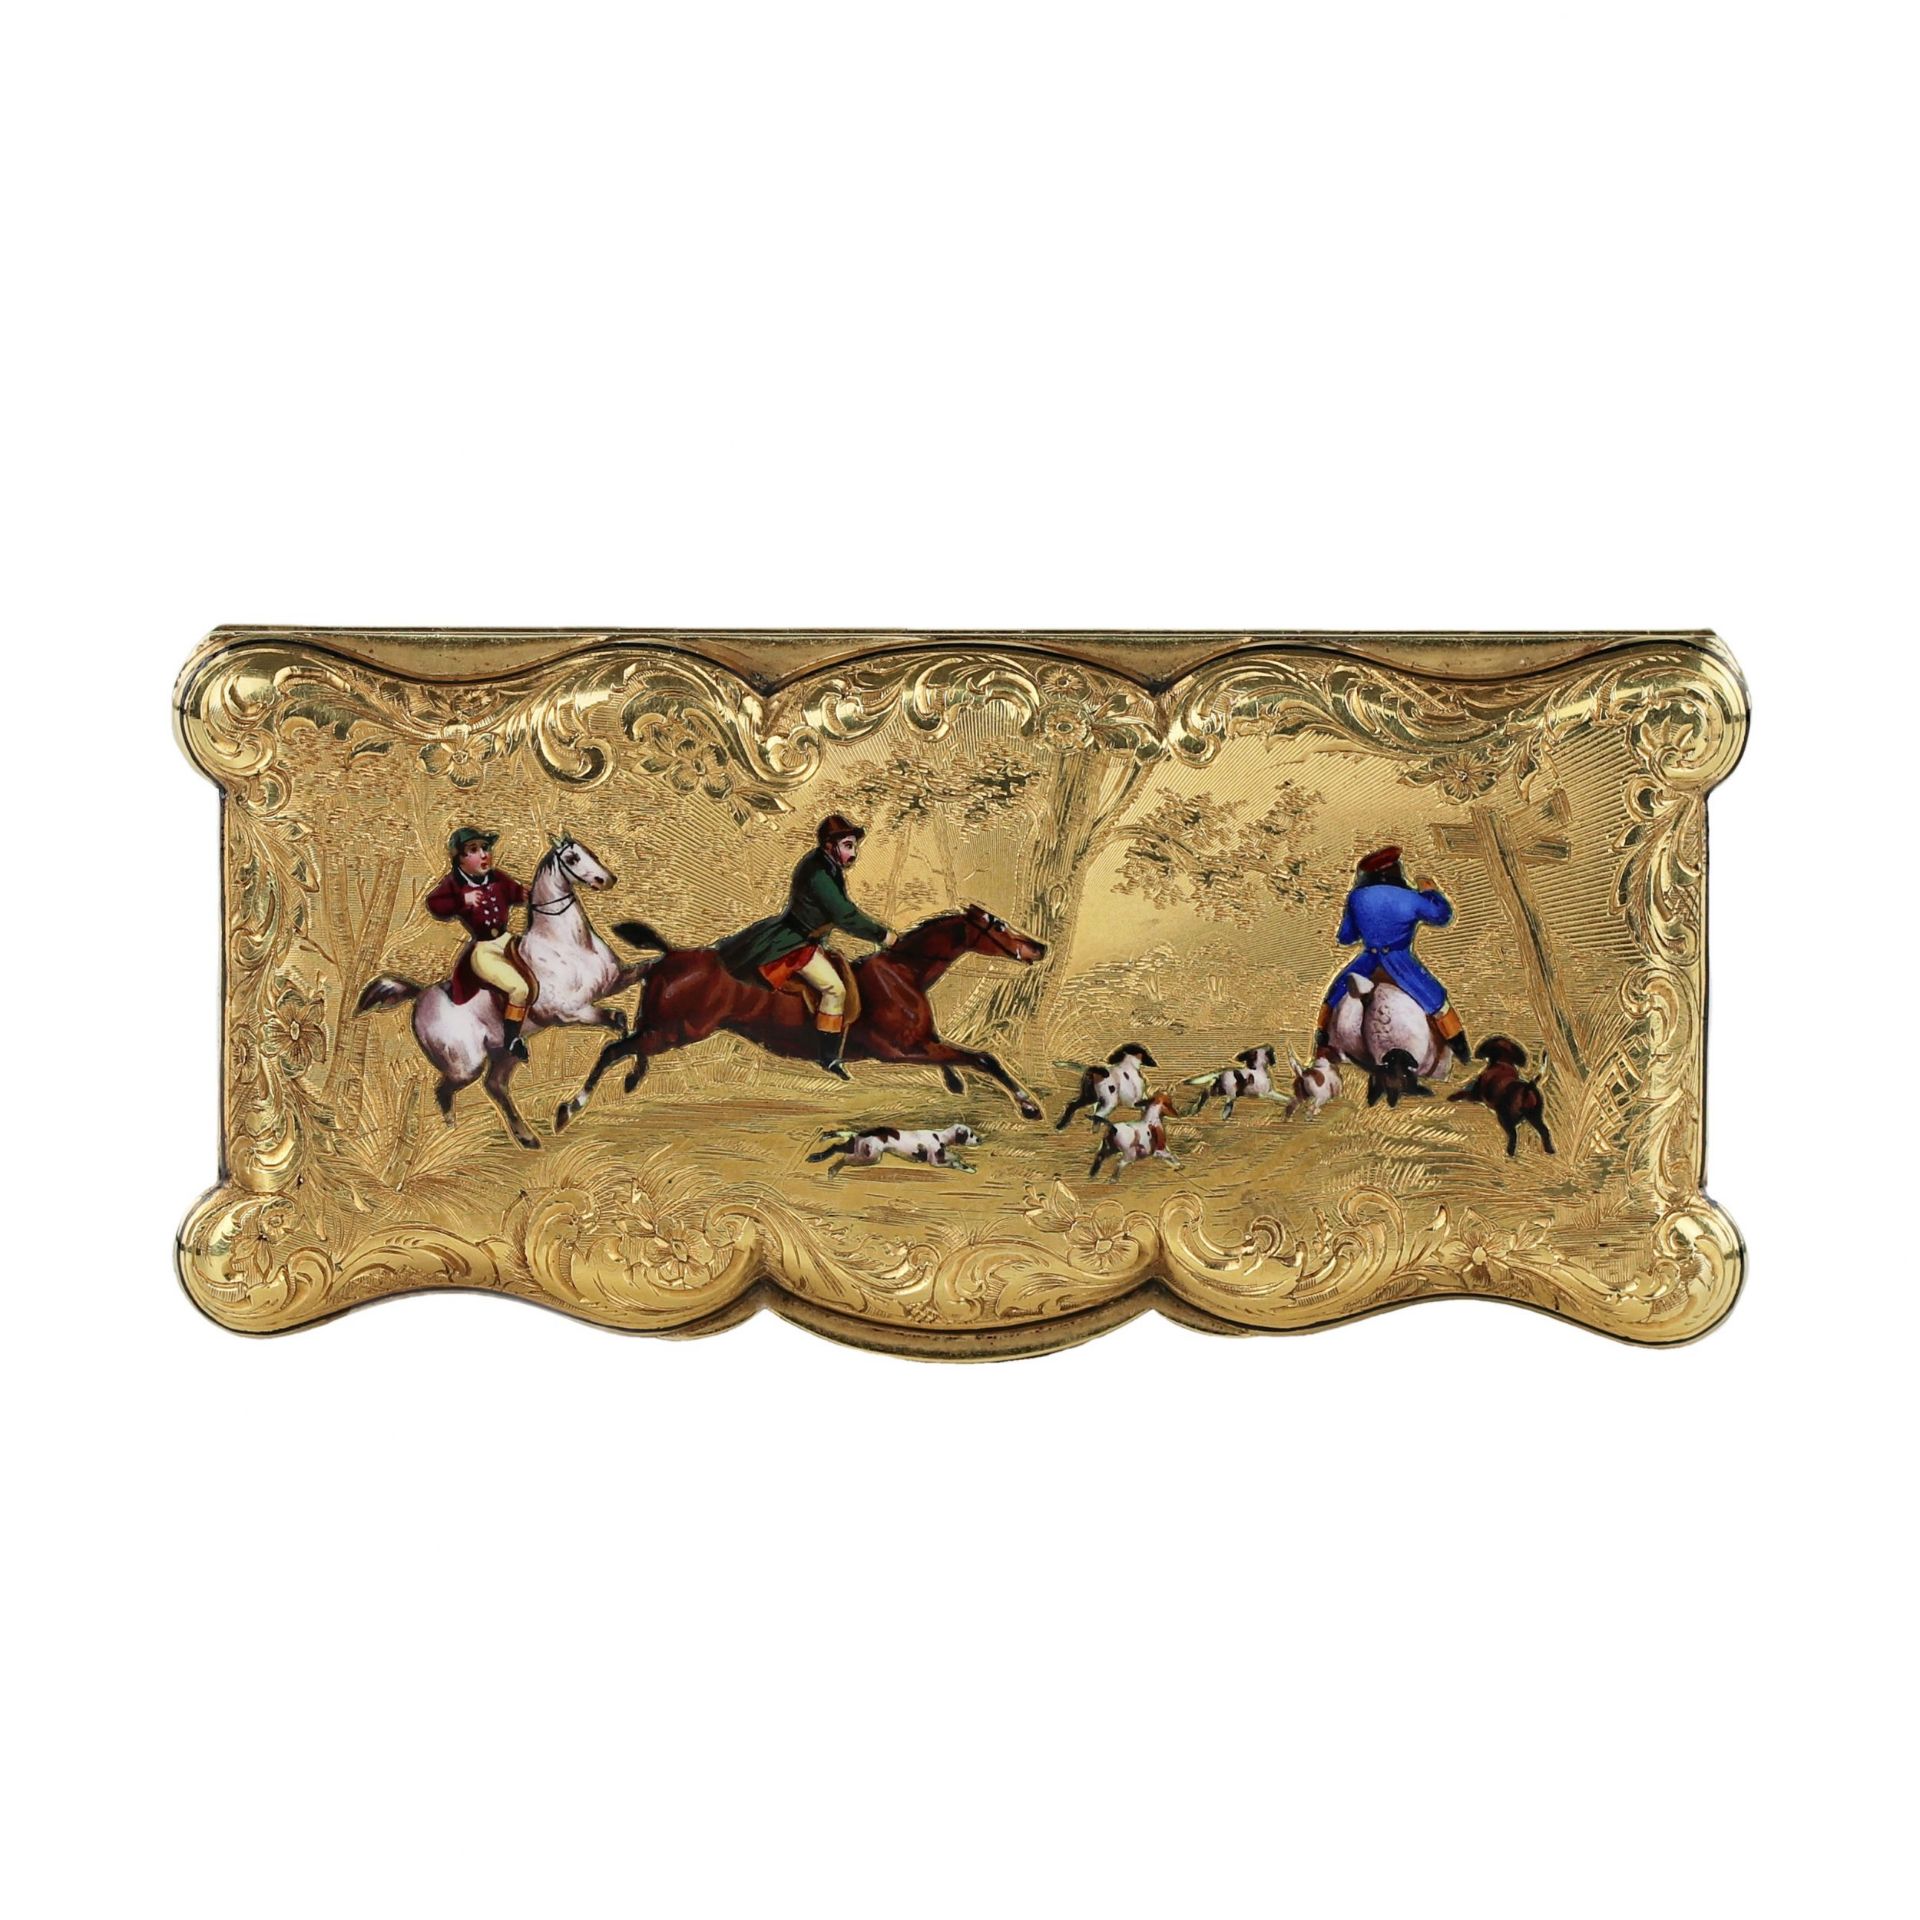 18K gold enameled snuffbox with scenes of equestrian hunting. French work of the 19th century. - Image 4 of 10